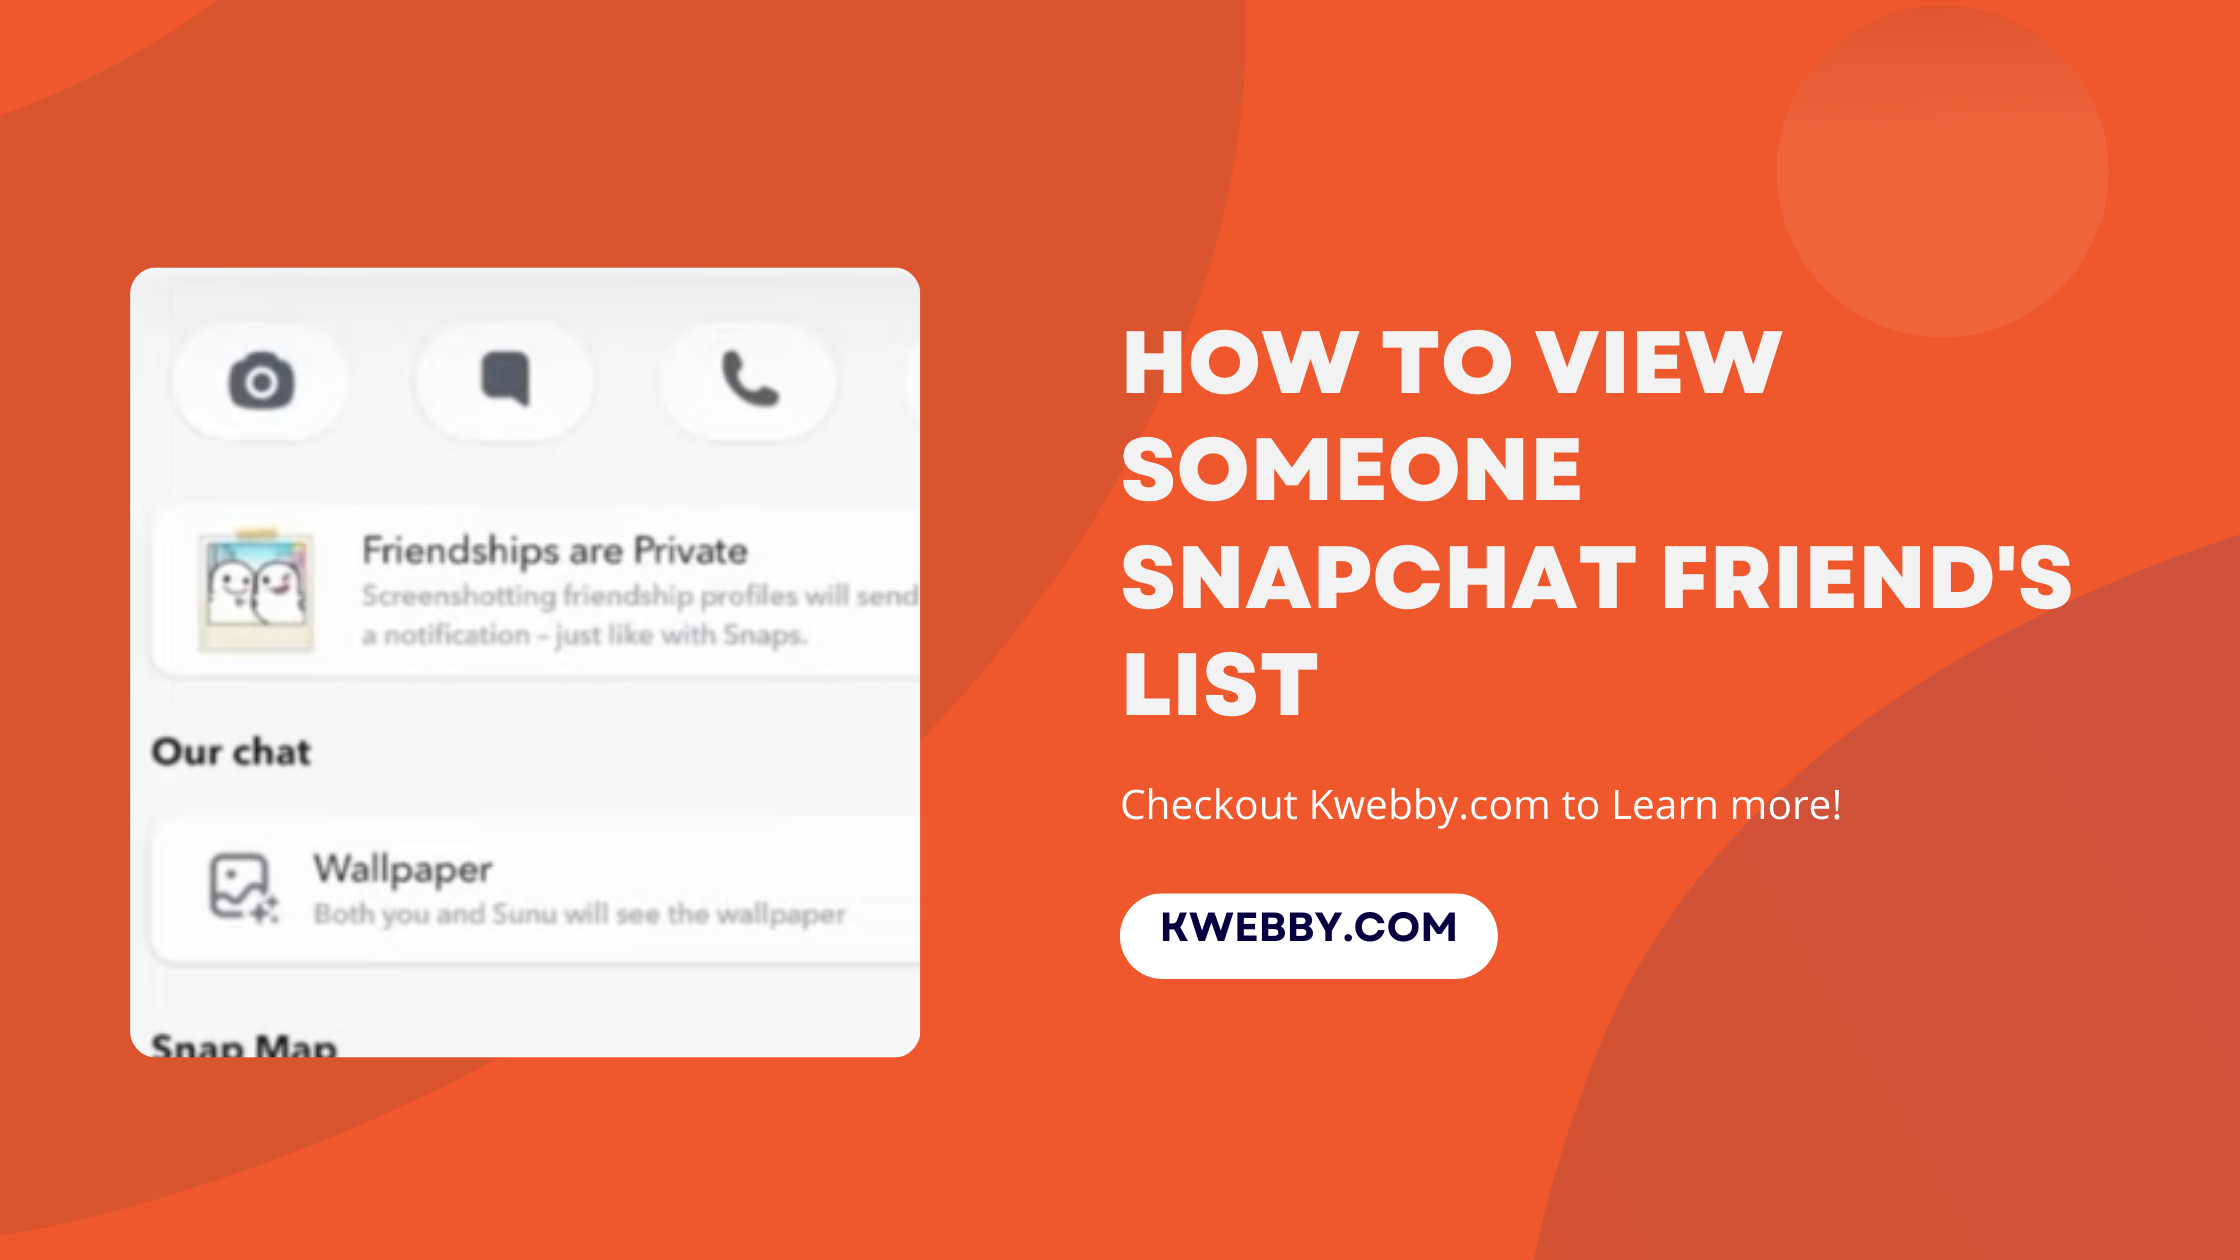 How to view someone Snapchat friend's list